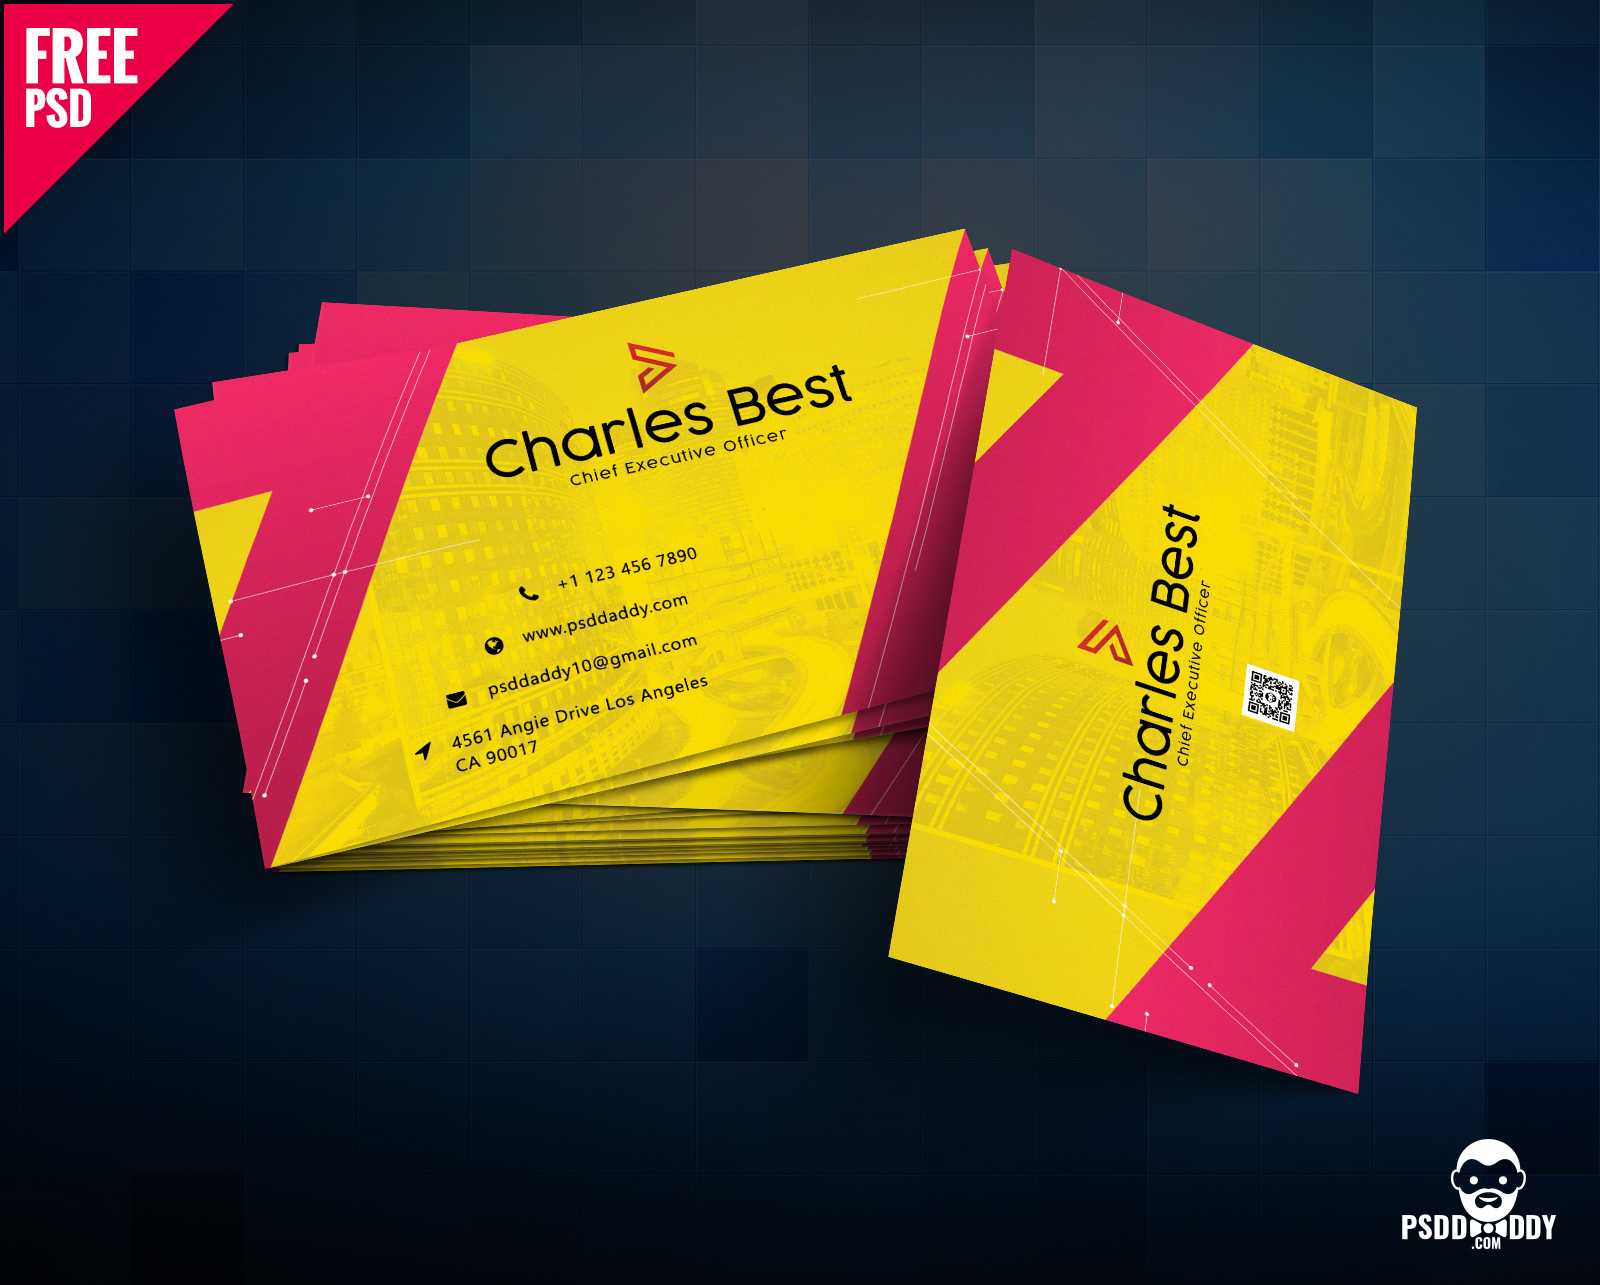 Download] Creative Business Card Free Psd | Psddaddy Inside Name Card Template Photoshop